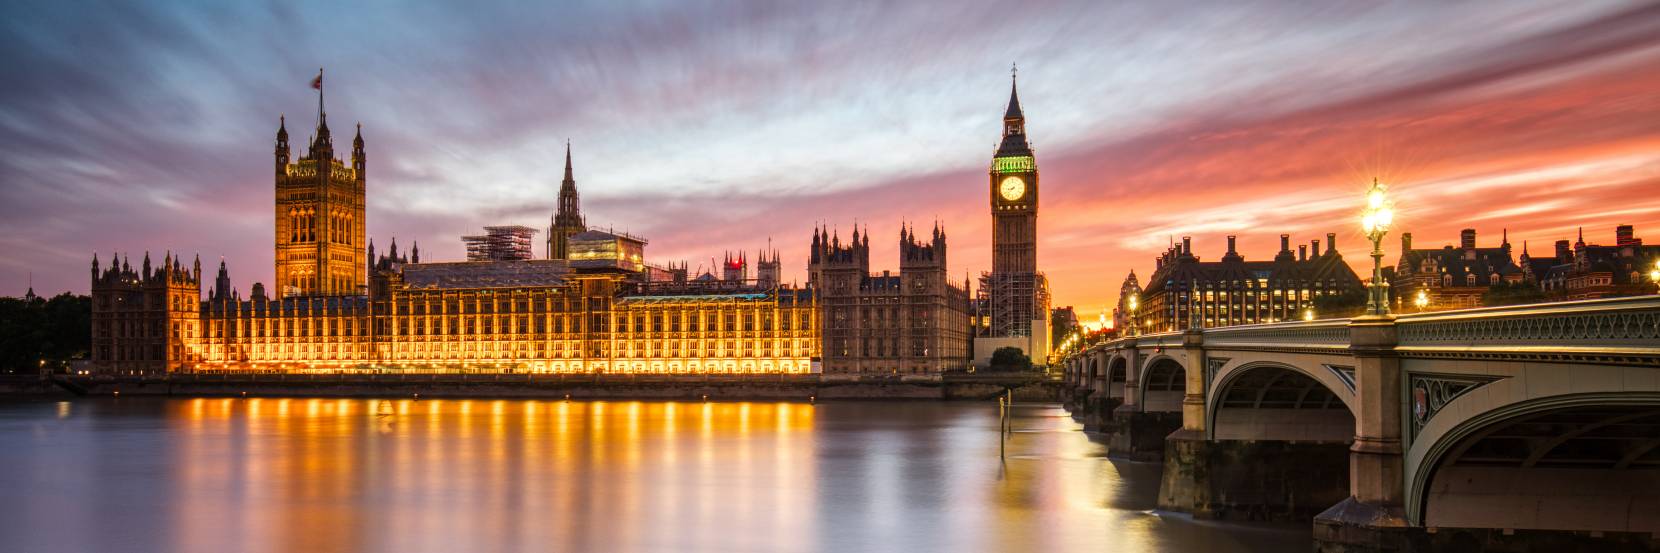 Houses of parliament at sunset 